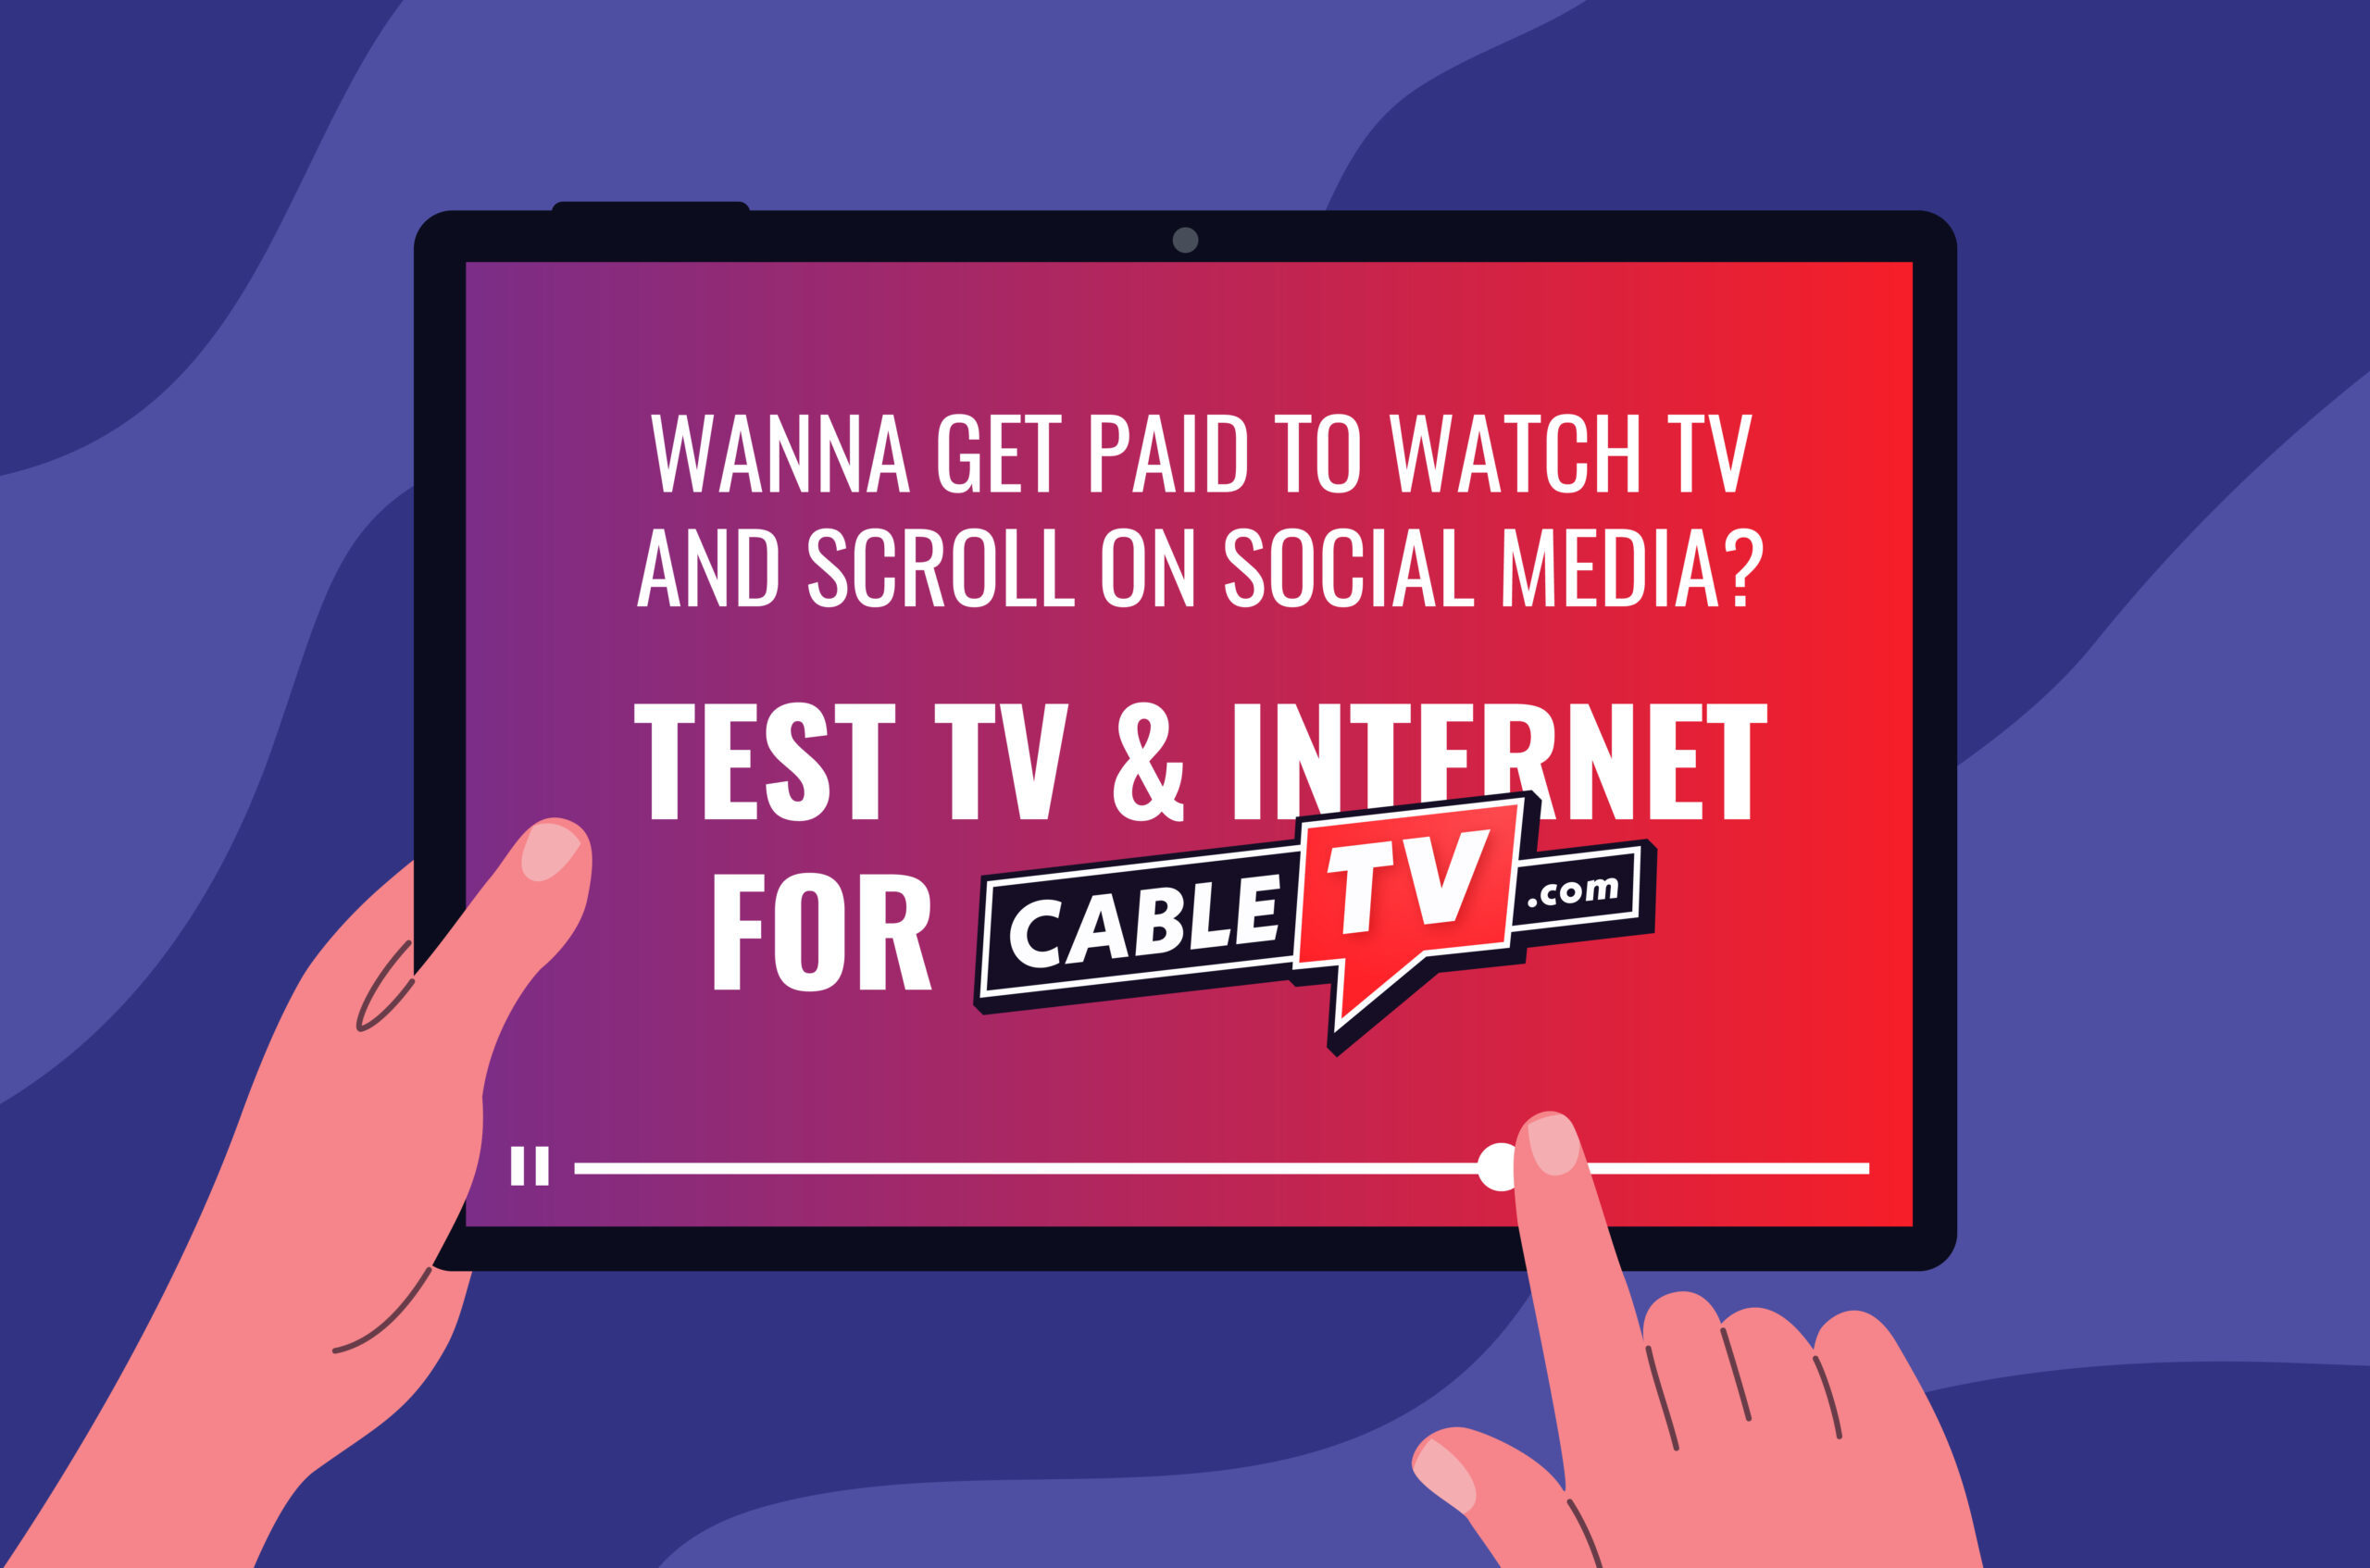 Get paid to test your TV and internet